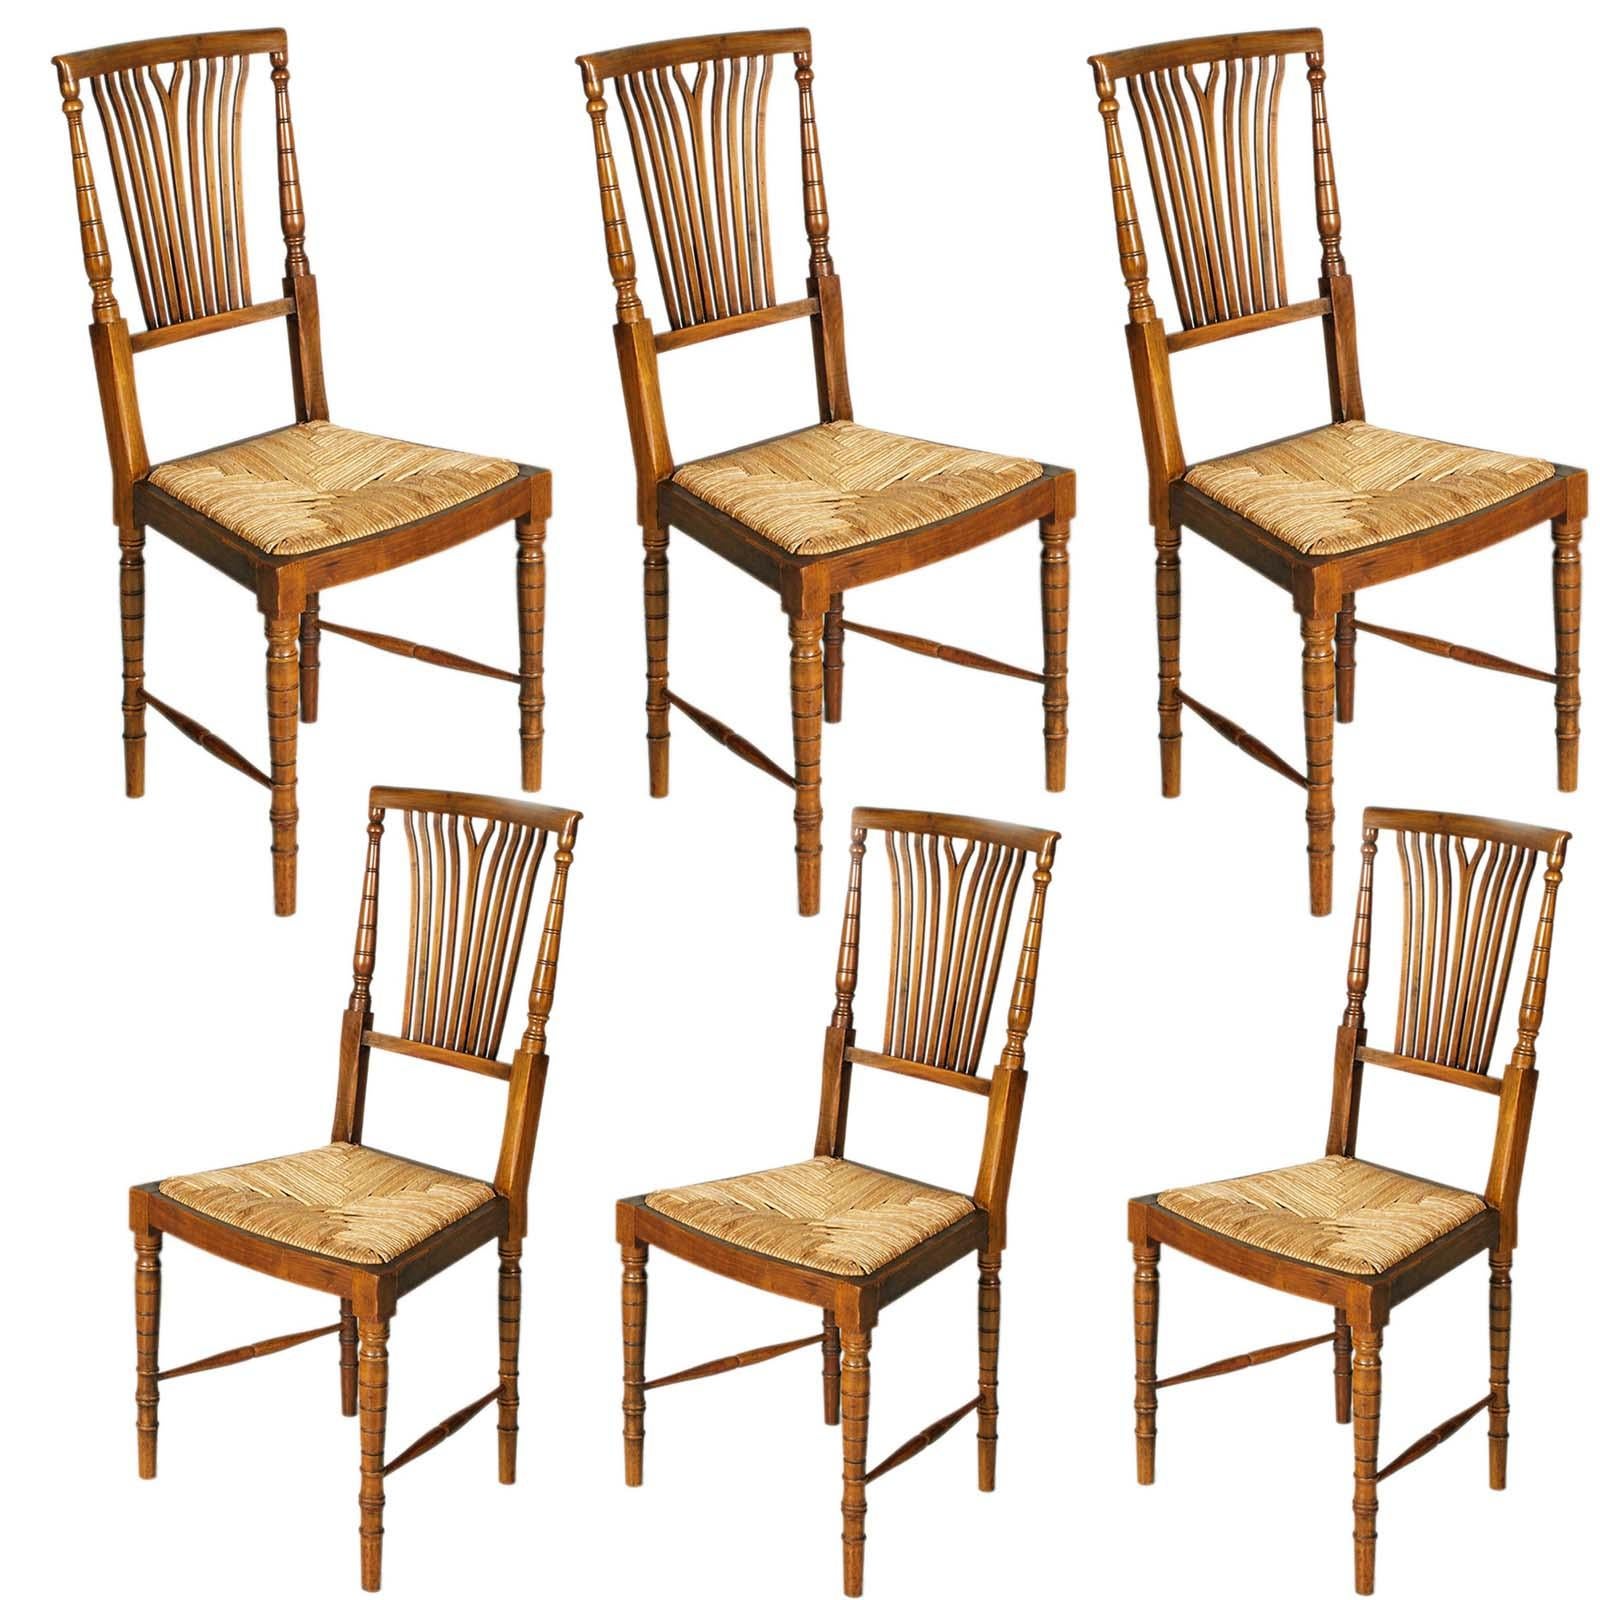 Exceptional set of six Chiavarine chairs from the 1960s, in walnut wood with original handmade straw seat, in excellent condition, sturdy and without defects.
Fratelli Levaggi manufacturer.

Abuot Gaetano Descalzi-CHIAVARINA CHAIR-
This handcrafted